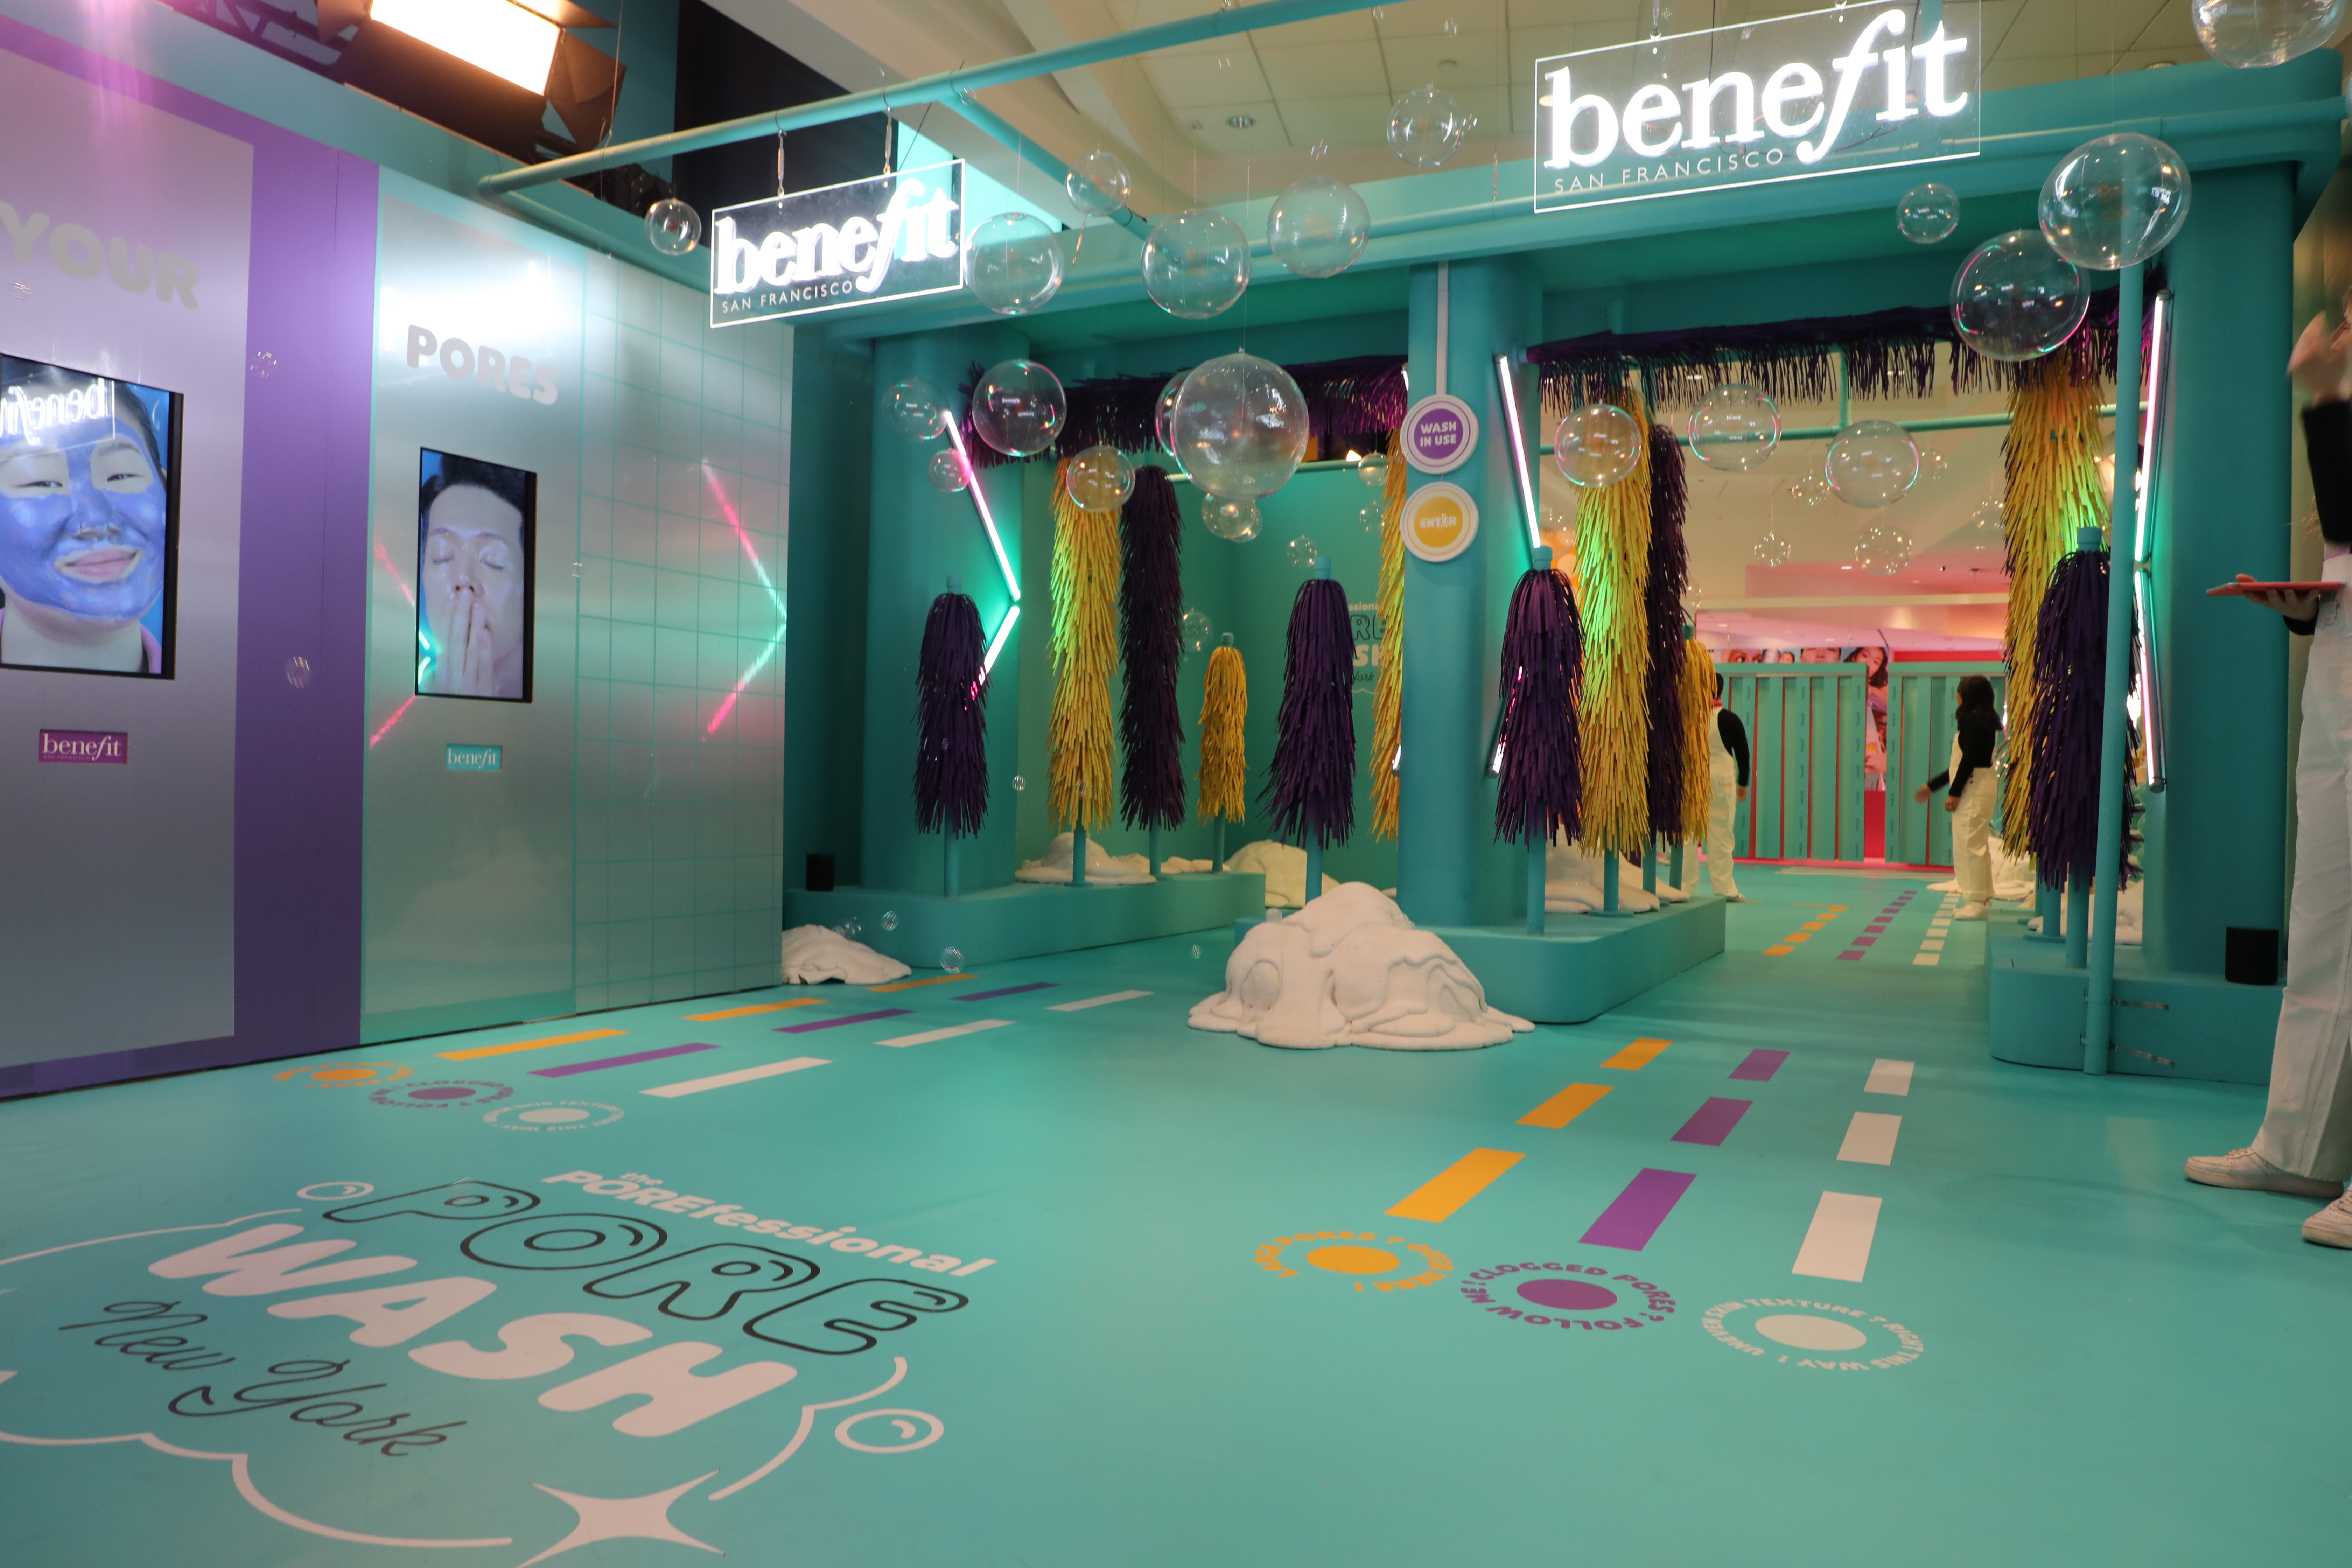 Benefit Cosmetics' Pore Care line launched in February